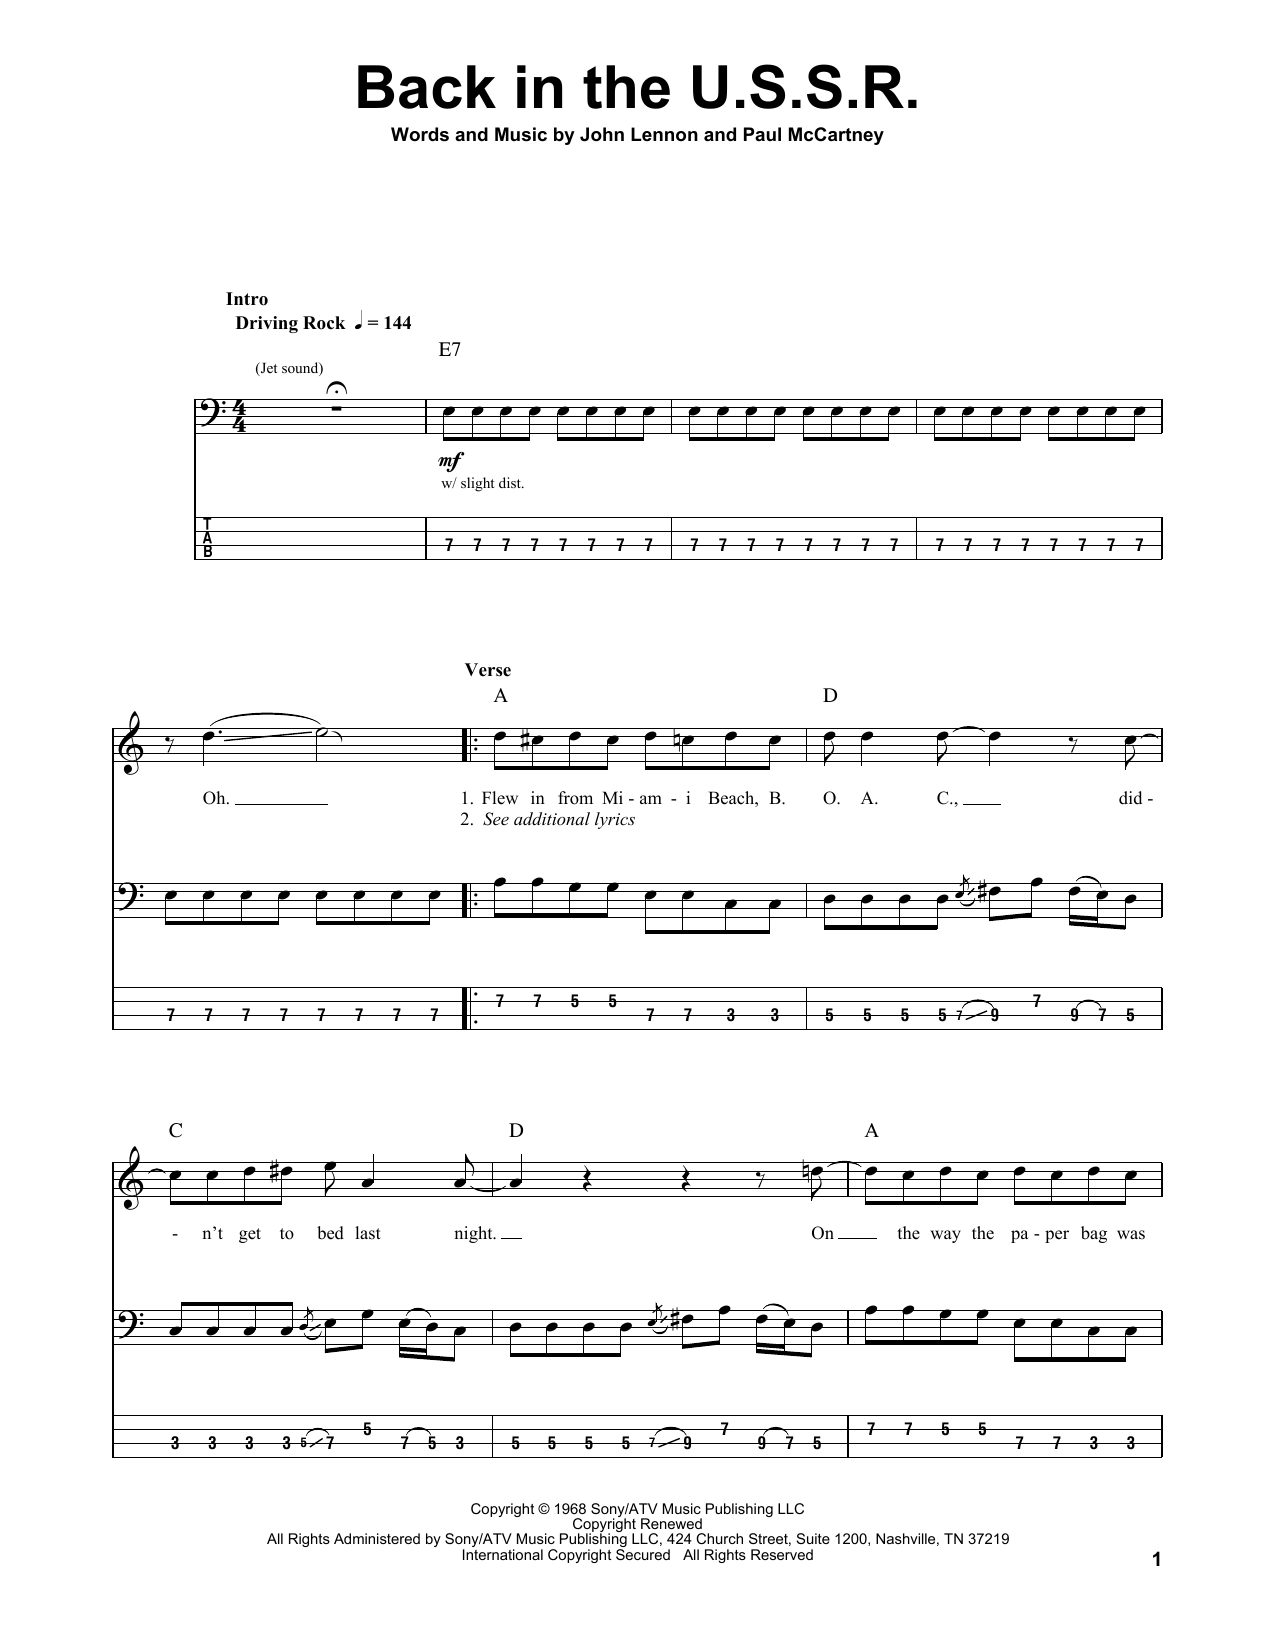 Download The Beatles Back In The U.S.S.R. Sheet Music